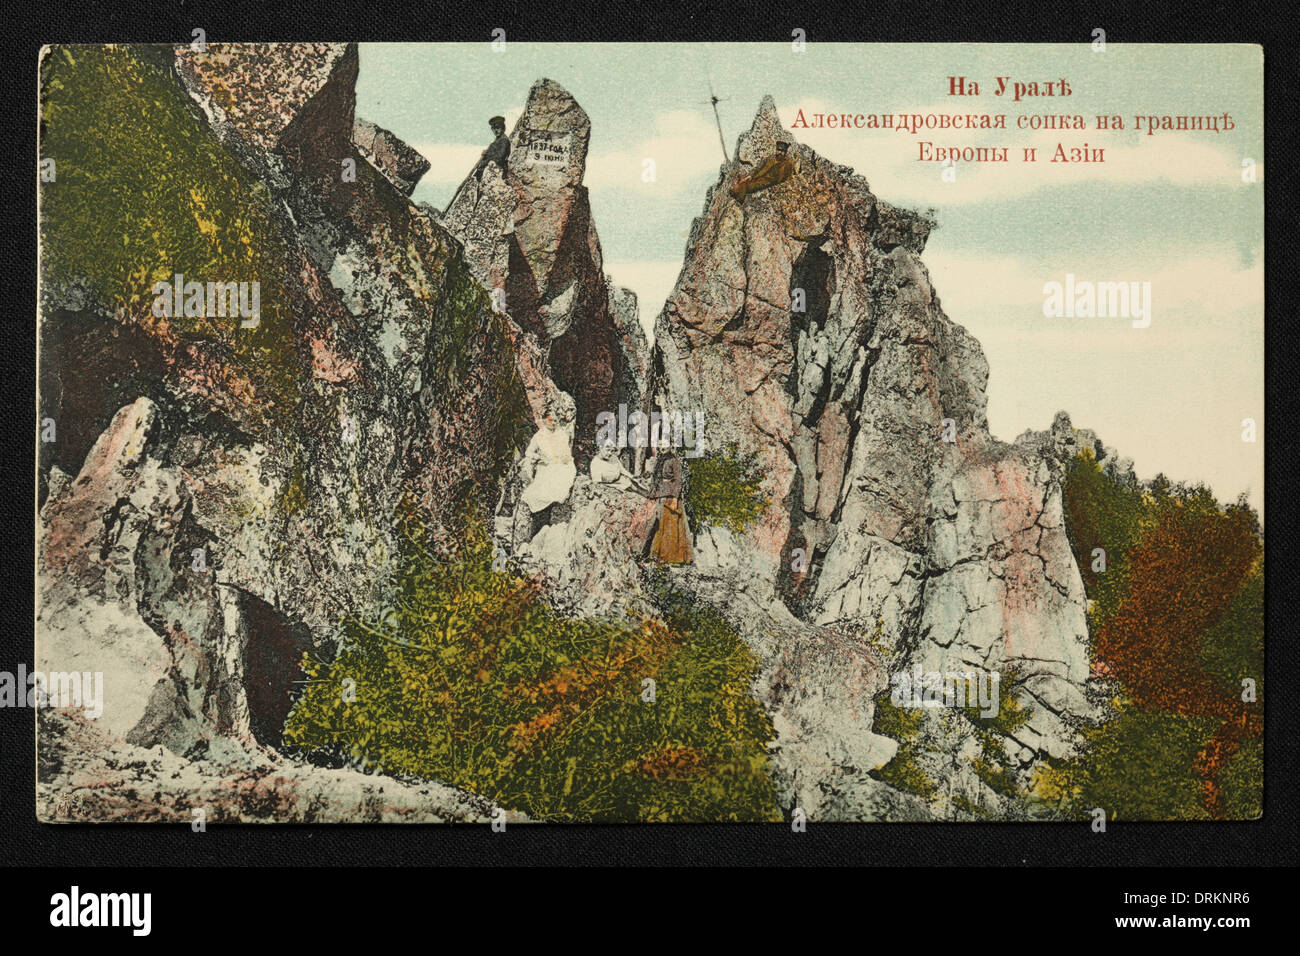 Mount Alexandrovskaya Sopka on the border between Europe and Asia in the Ural Mountains, Russian Empire. Black and white vintage photograph by Russian photographer Veniamin Metenkov dated from the beginning of the 20th century issued in the Russian vintage postcard published by Veniamin Metenkov himself in Yekaterinburg, Russia. Text in Russian: In the Urals. Alexandrovskaya Sopka on the border of Europe and Asia. Alexandrovskaya Sopka (843 m) is a mountain in the Ural Tau Range, located in Chelyabinsk region, Russia, some 8 km from Zlatoust. Courtesy of the Azoor Postcard Collection. Stock Photo